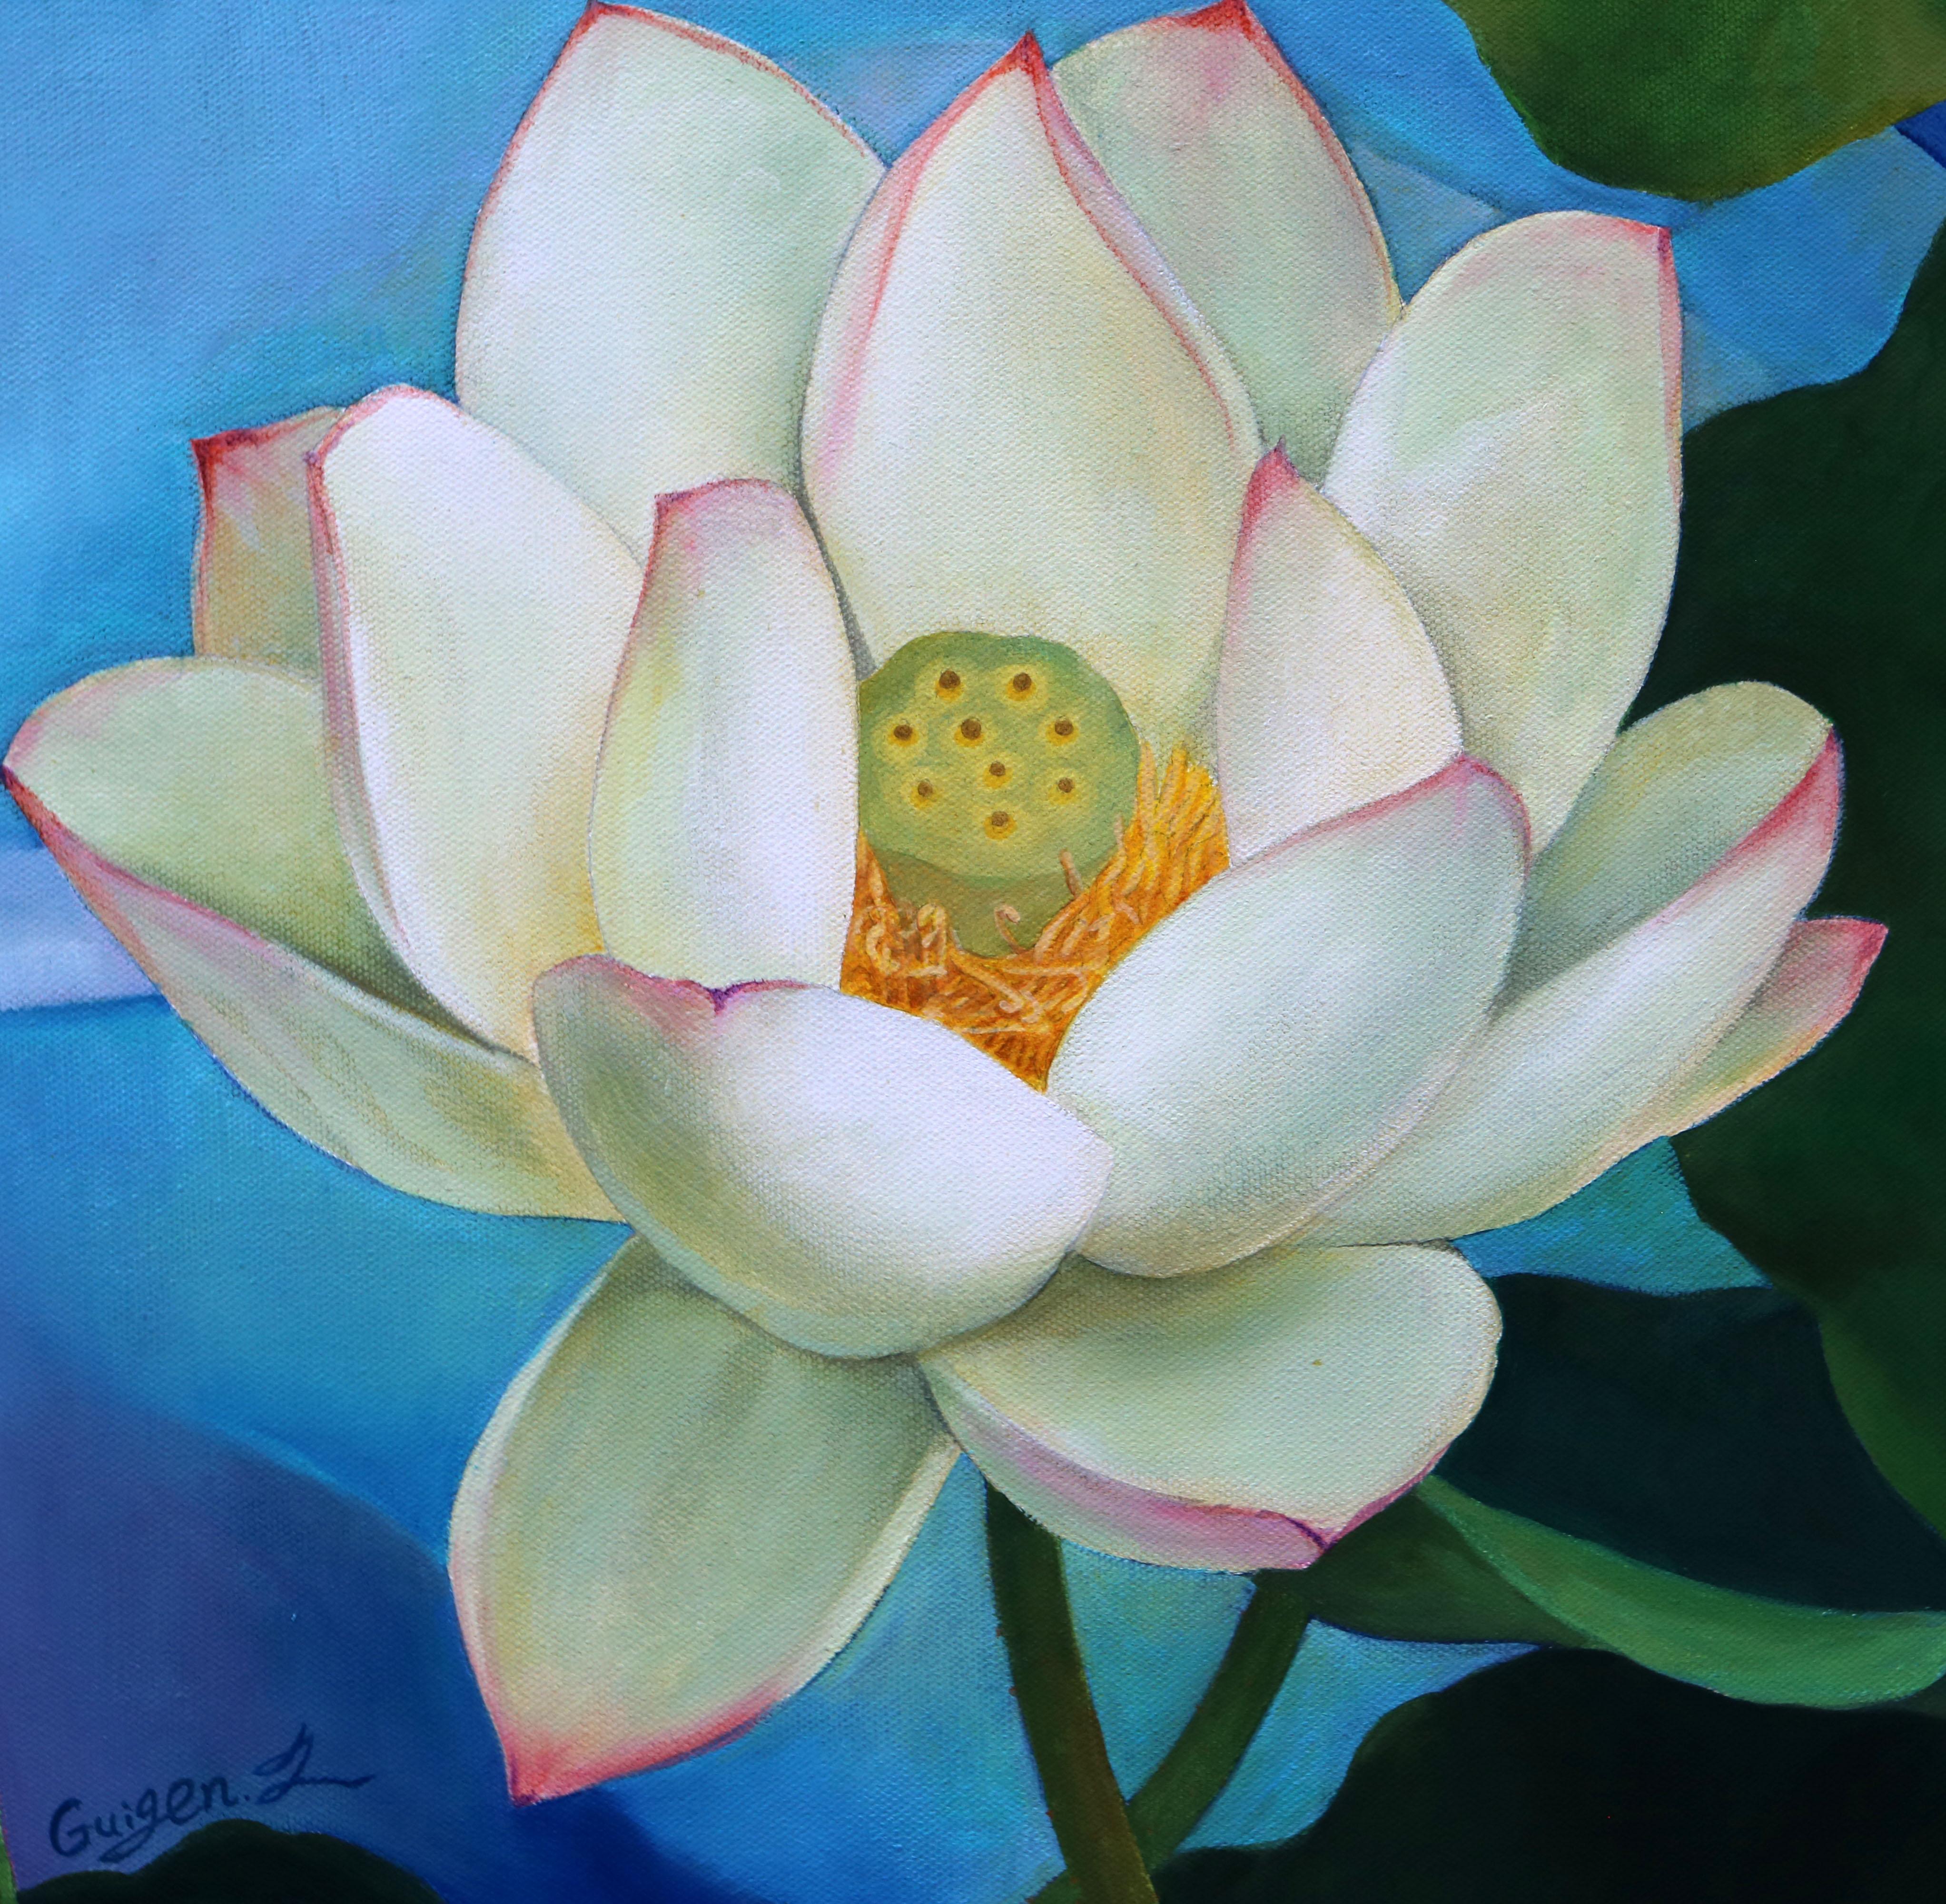 <p>Artist Comments<br>Artist Guigen Zha displays an exquisite white lotus in stark focus and realistic detail. The flower flourishes with velvety white petals and tender pink tips. The long-stemmed leaves reflect its beauty in the pristine turquoise